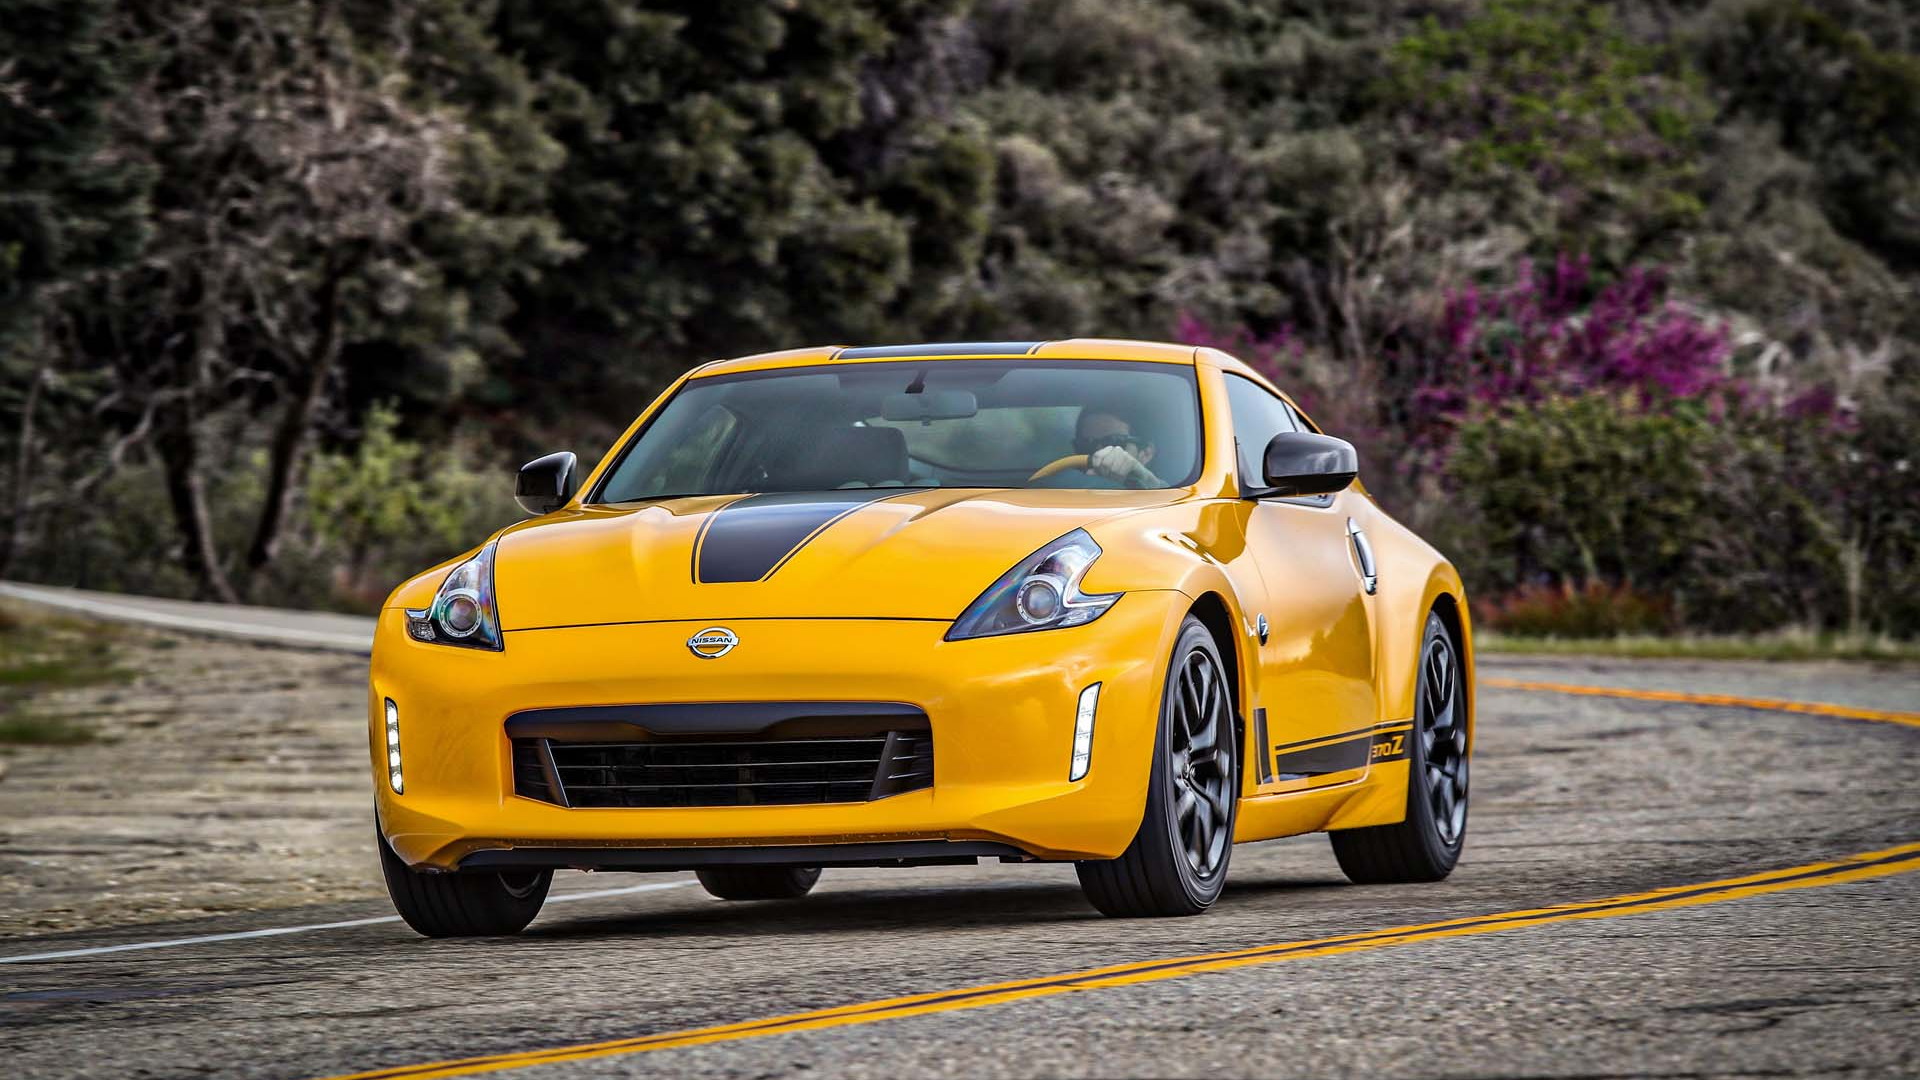 Report Next Generation Nissan Z Given Green Light Hp AWD Nismo Version In Works